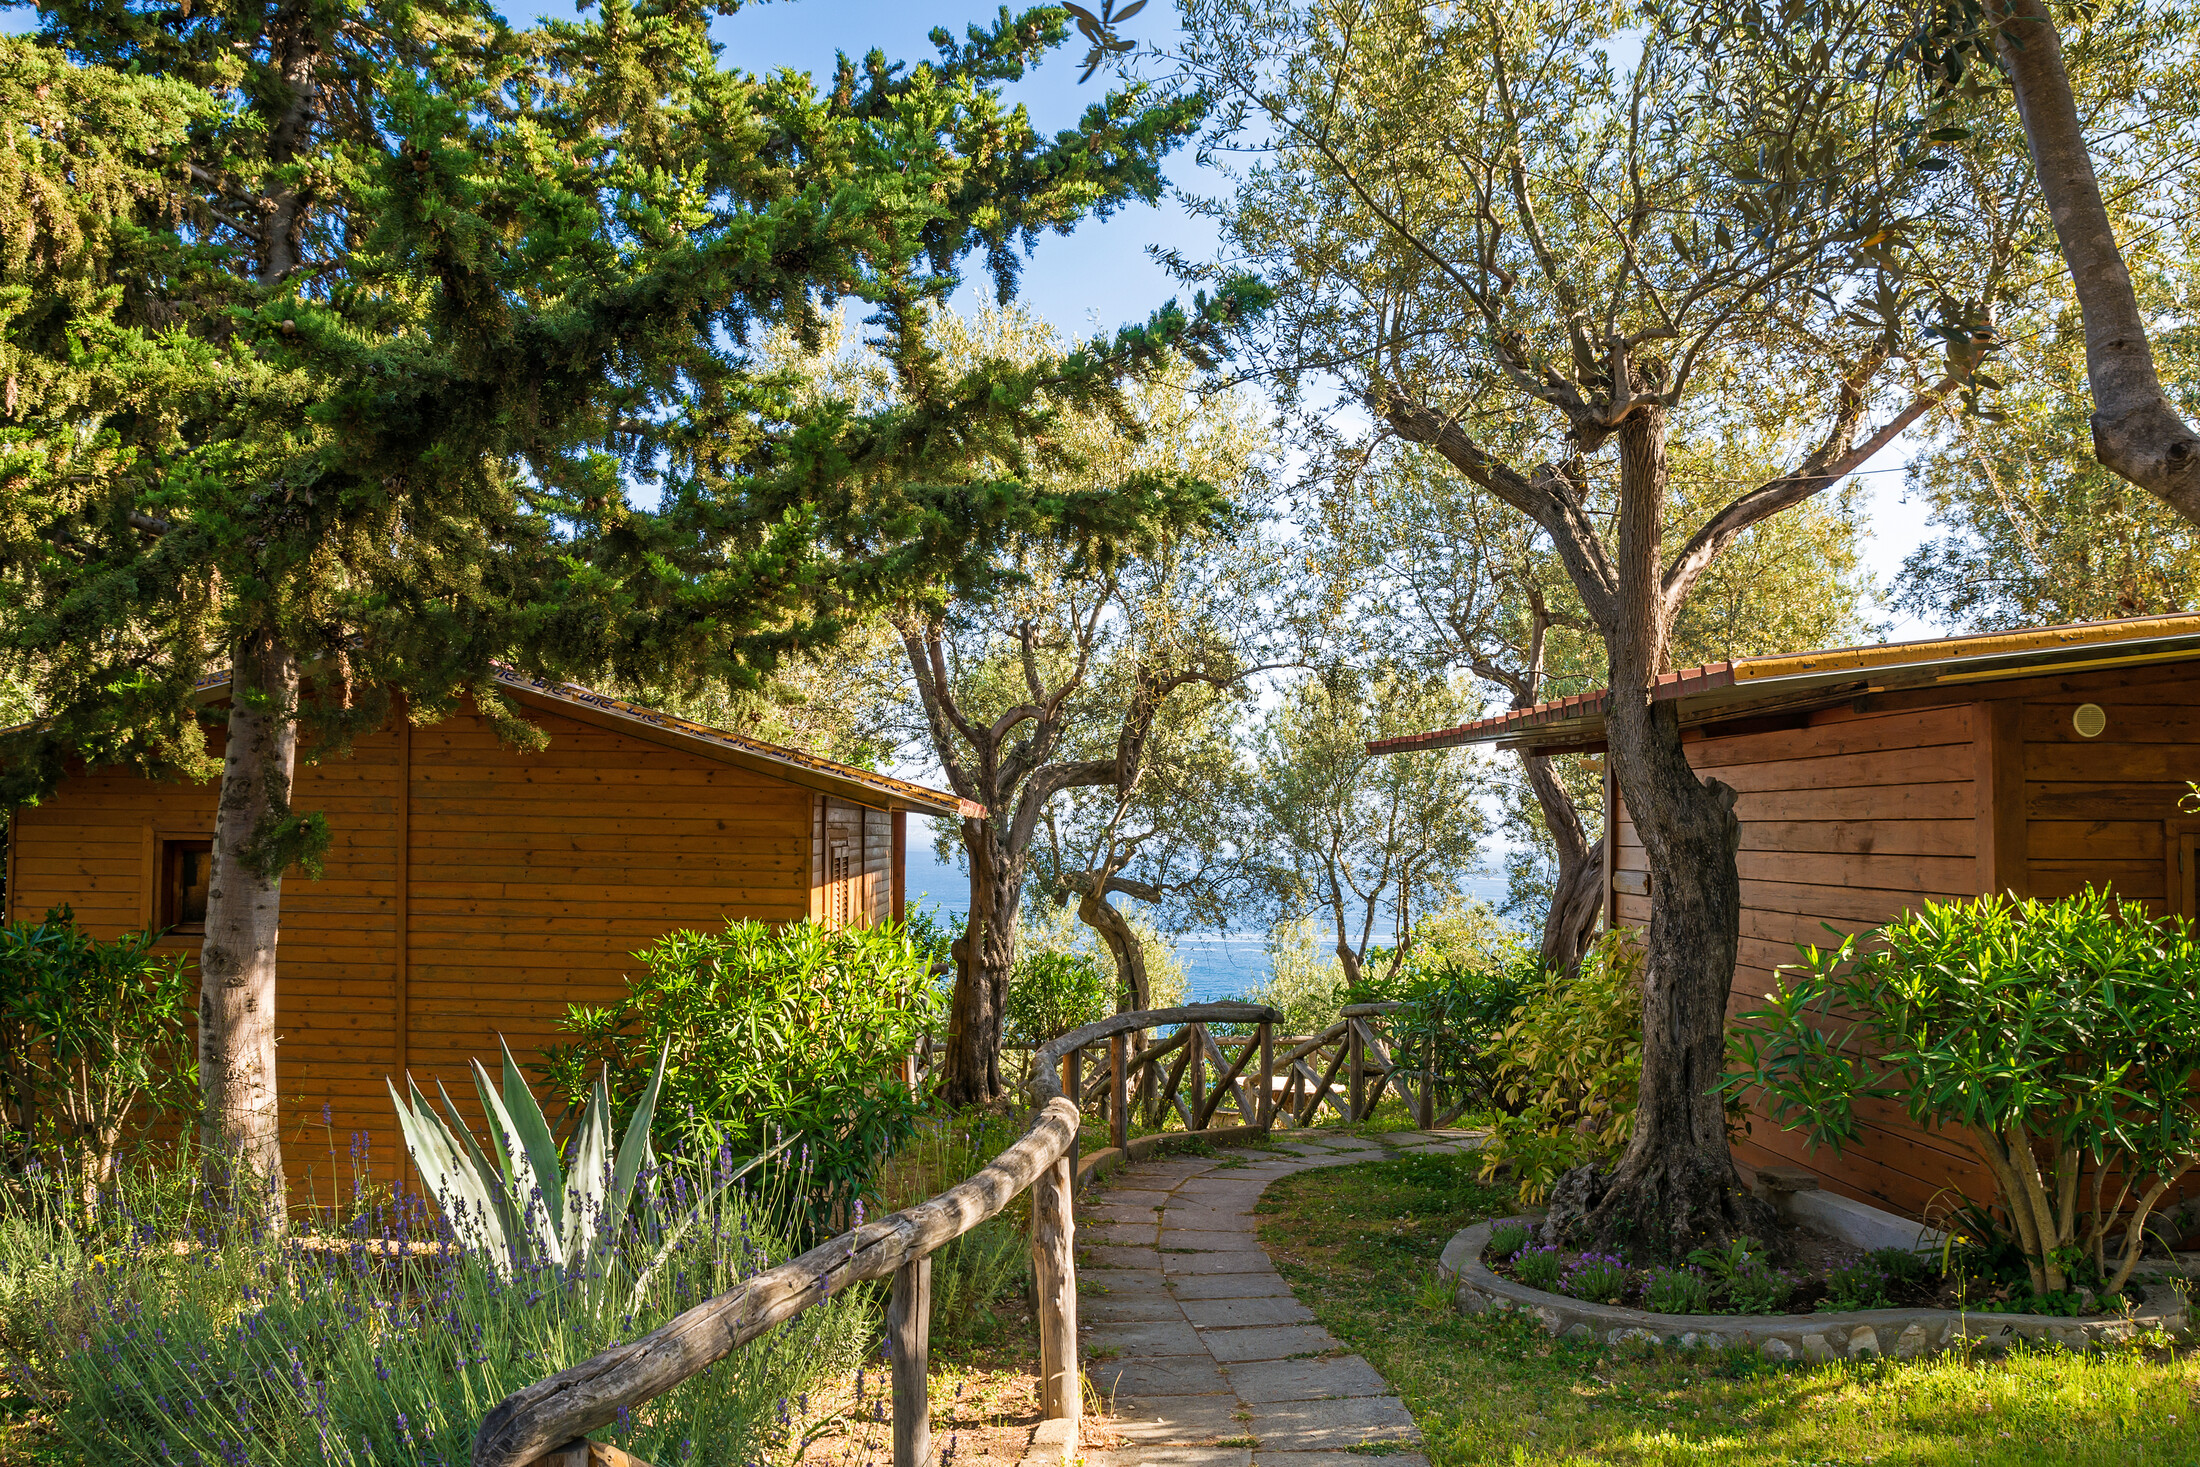 Holiday apartment - wooden cottage in forest near the sea. camping house in Italy near Sorrento